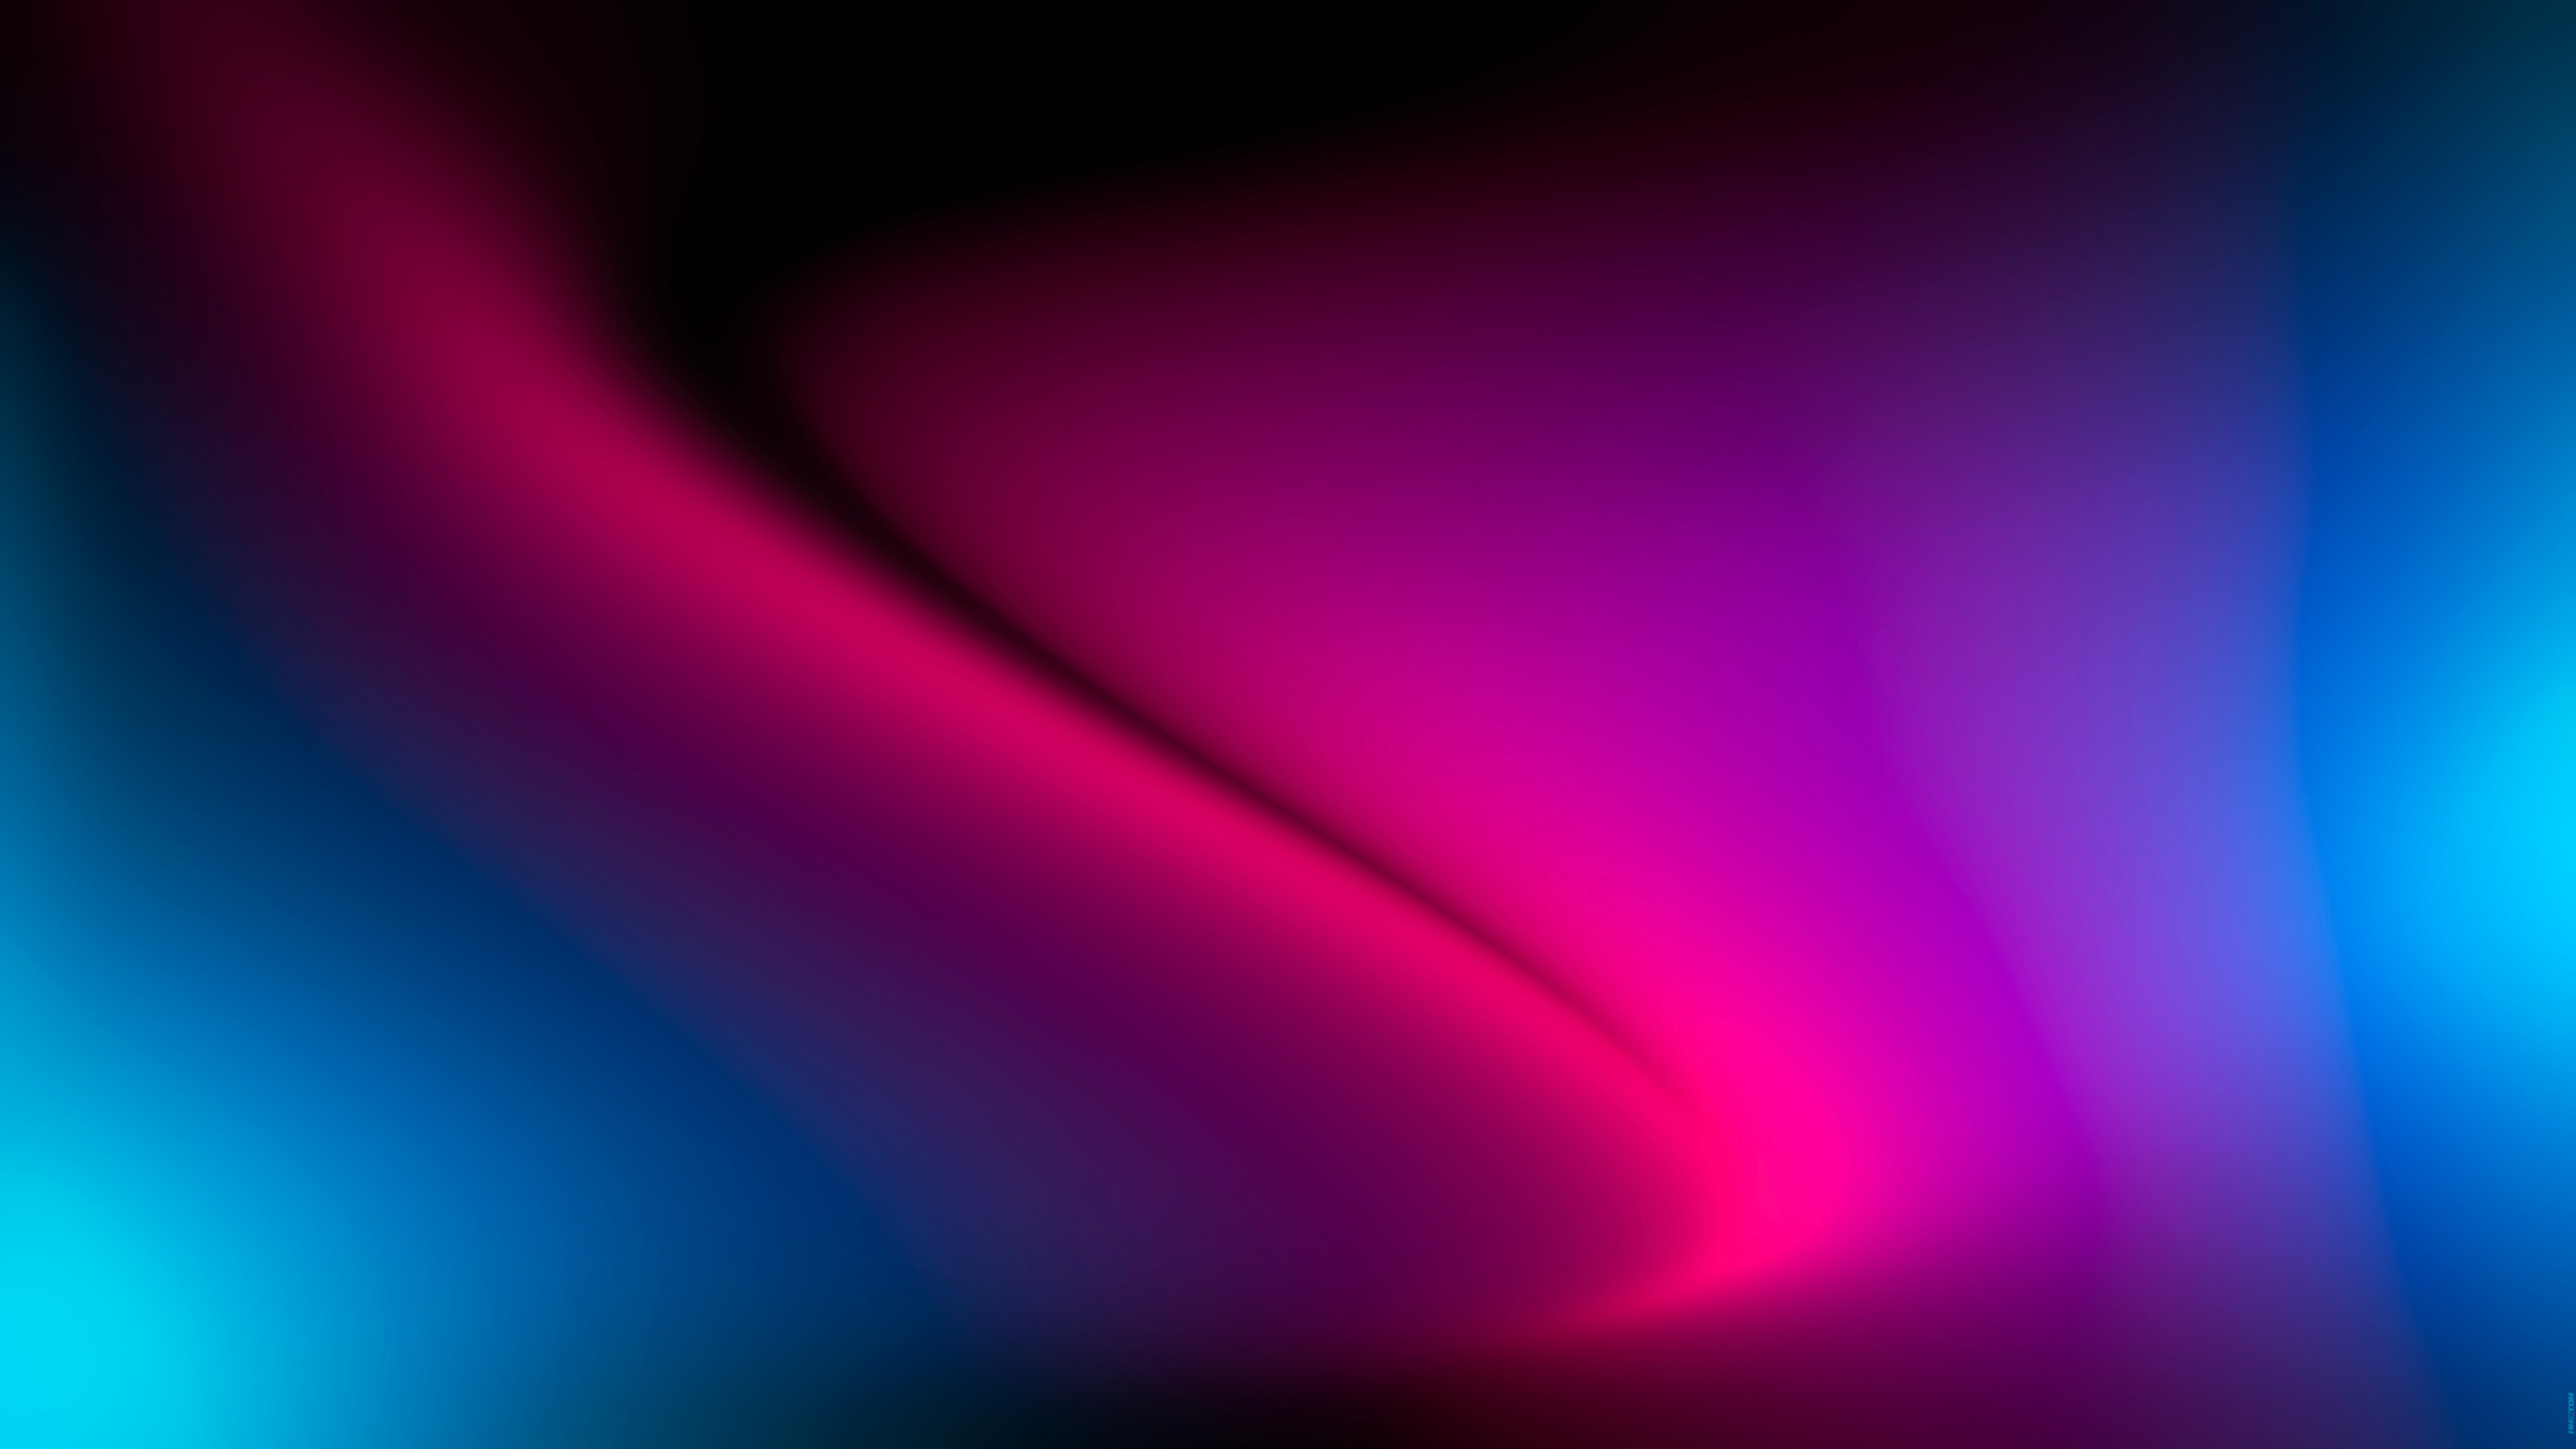 Neon lines glowing Abstract Wallpaper 8k Ultra HD ID:9697